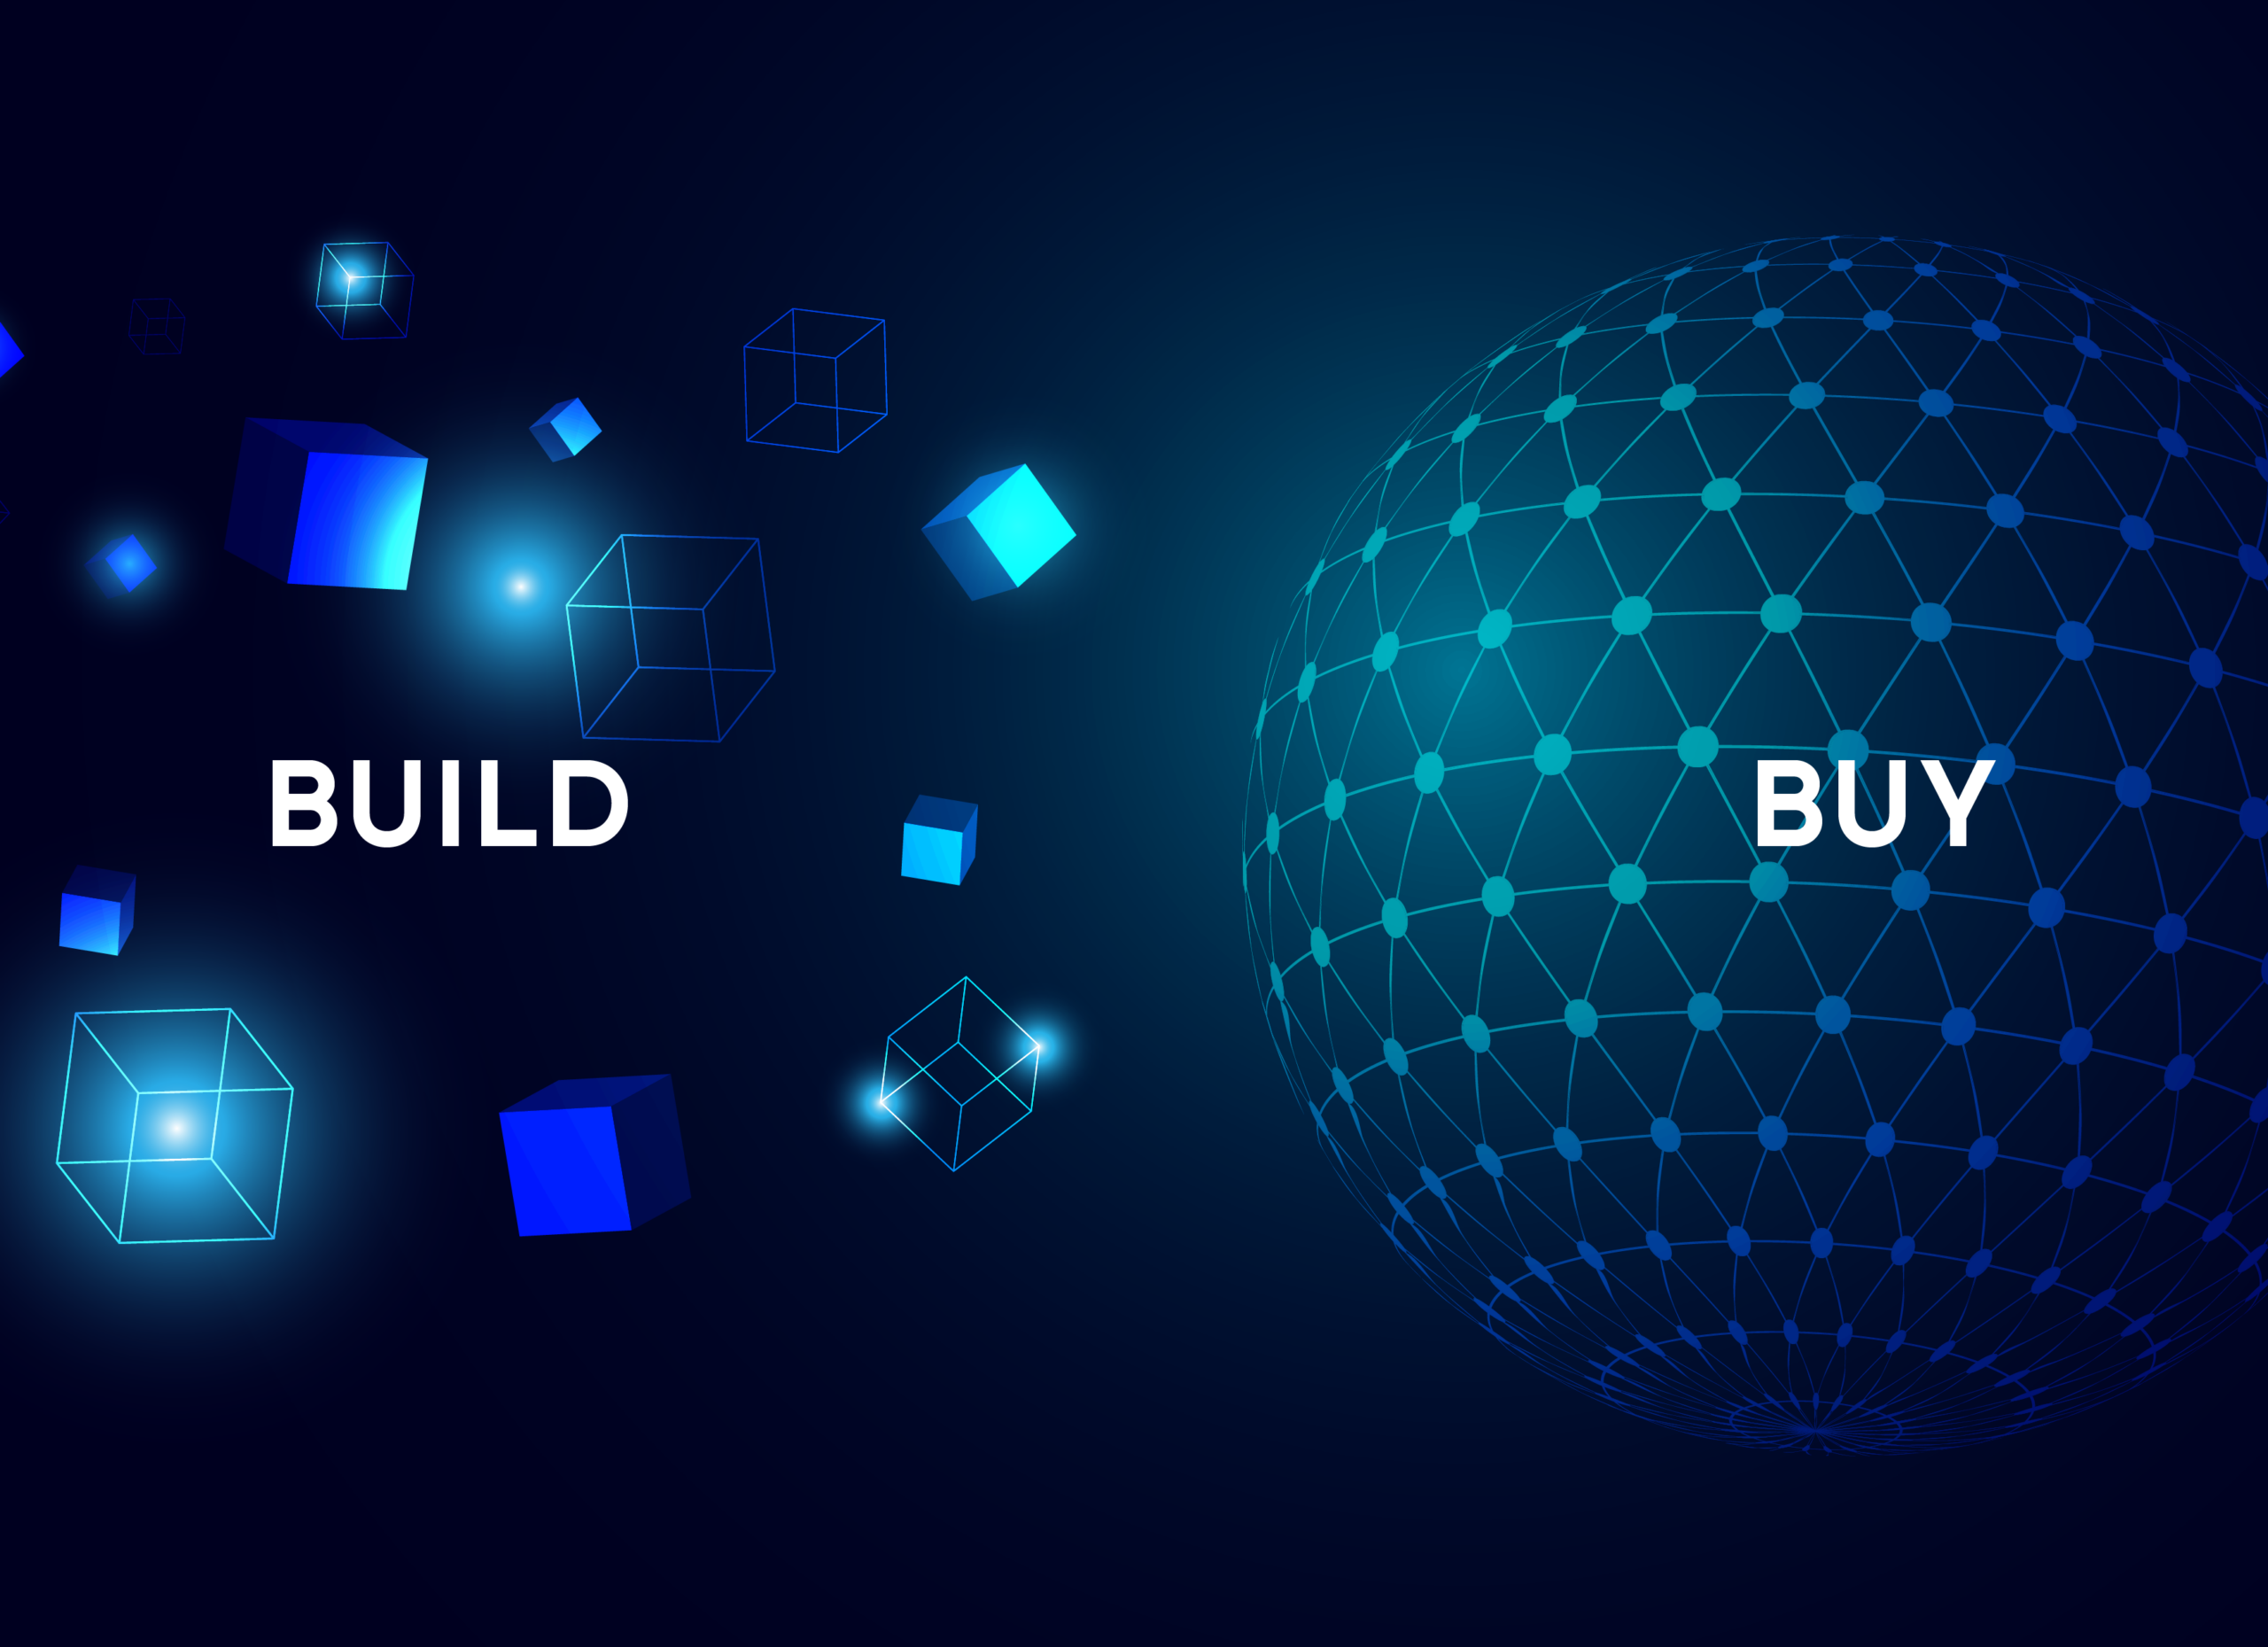 Illustration showing 'Build' on the left with floating cubes and 'Buy' on the right with a network sphere, representing a decision between building and buying solutions.